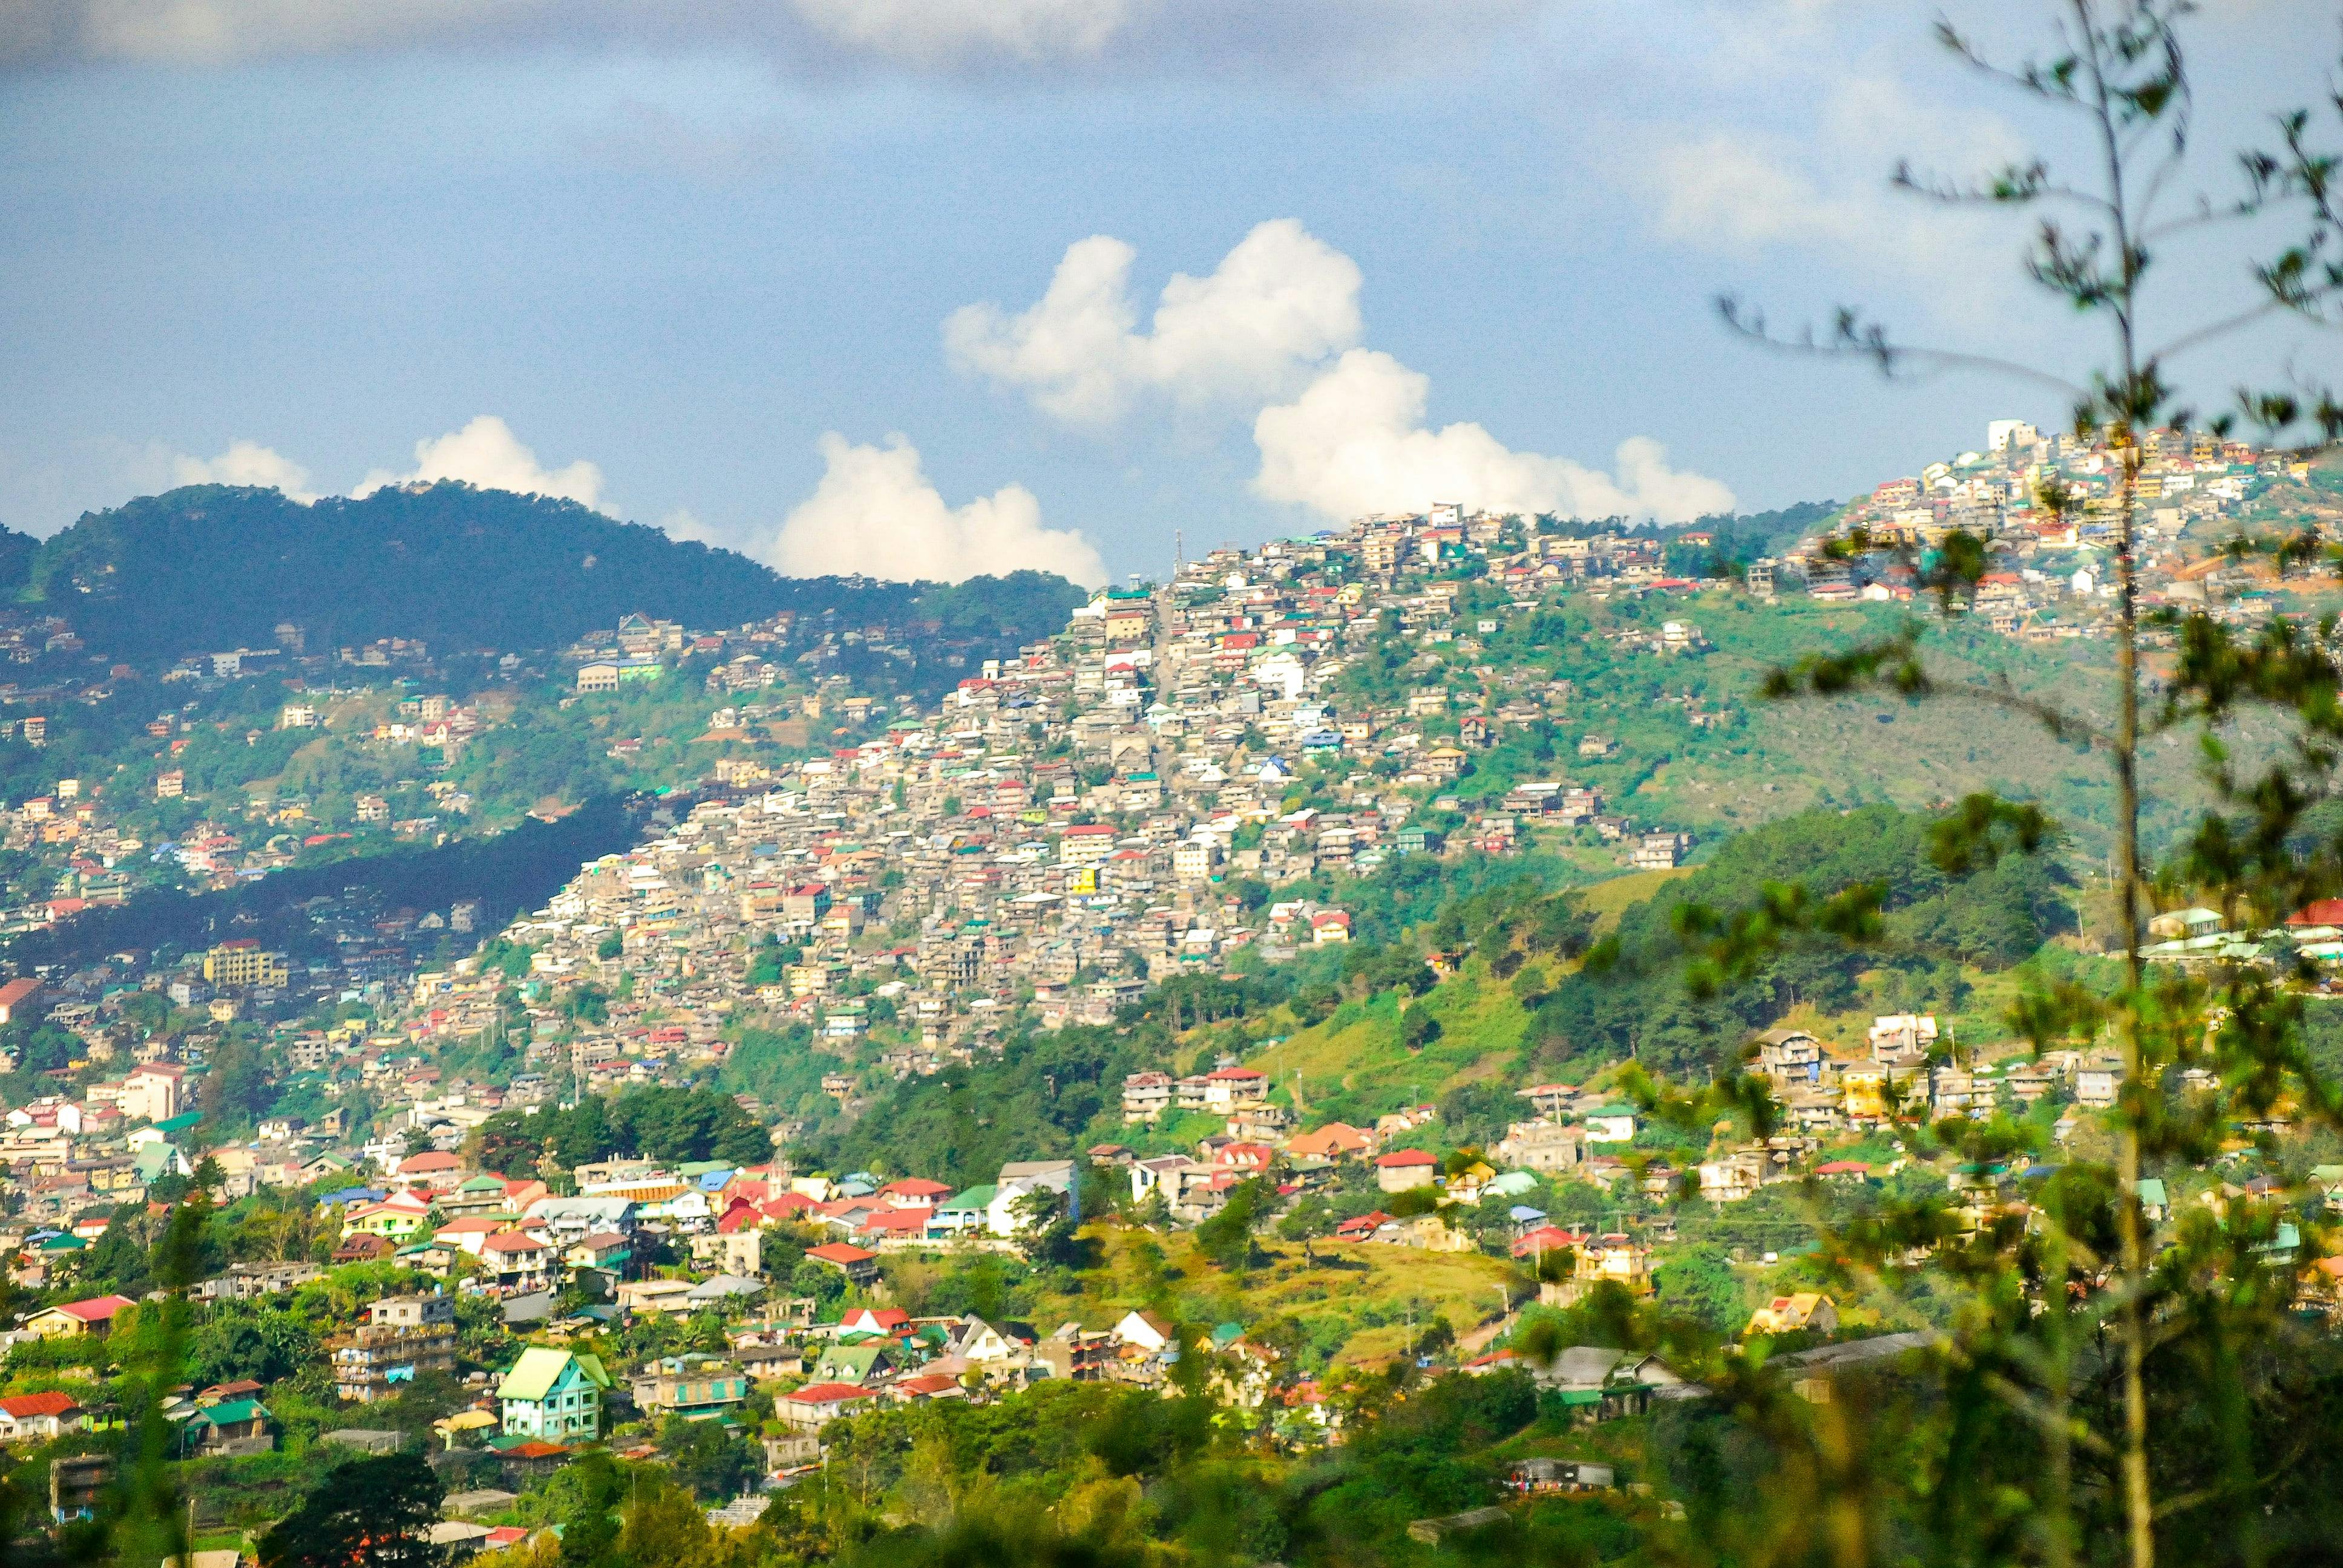 View from Mines View Park in Baguio City